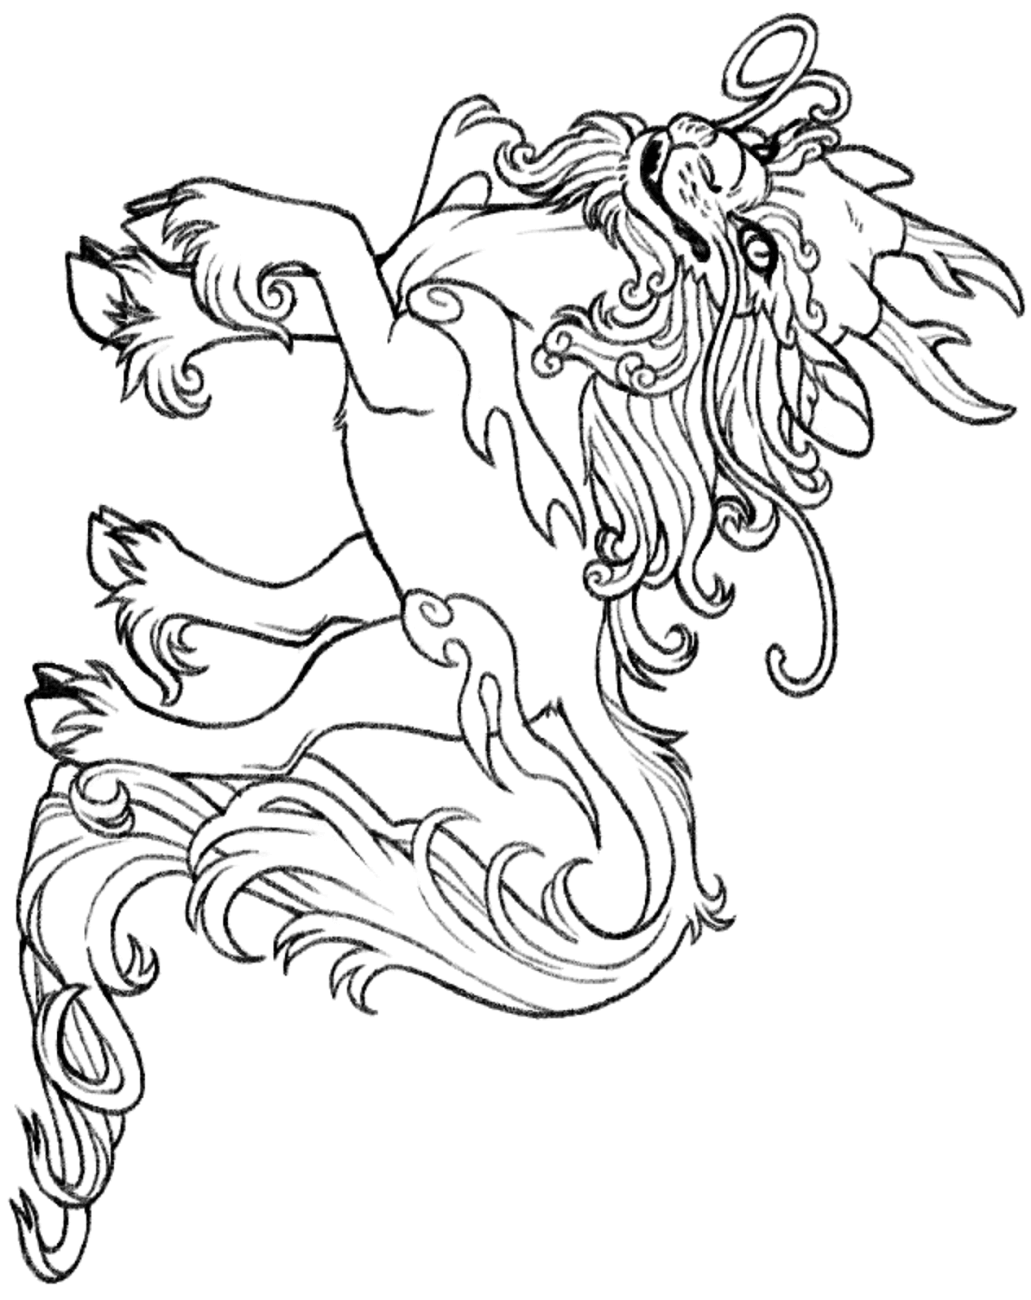 Download Simple Unicorn's Head Coloring Page - Free Printable ...